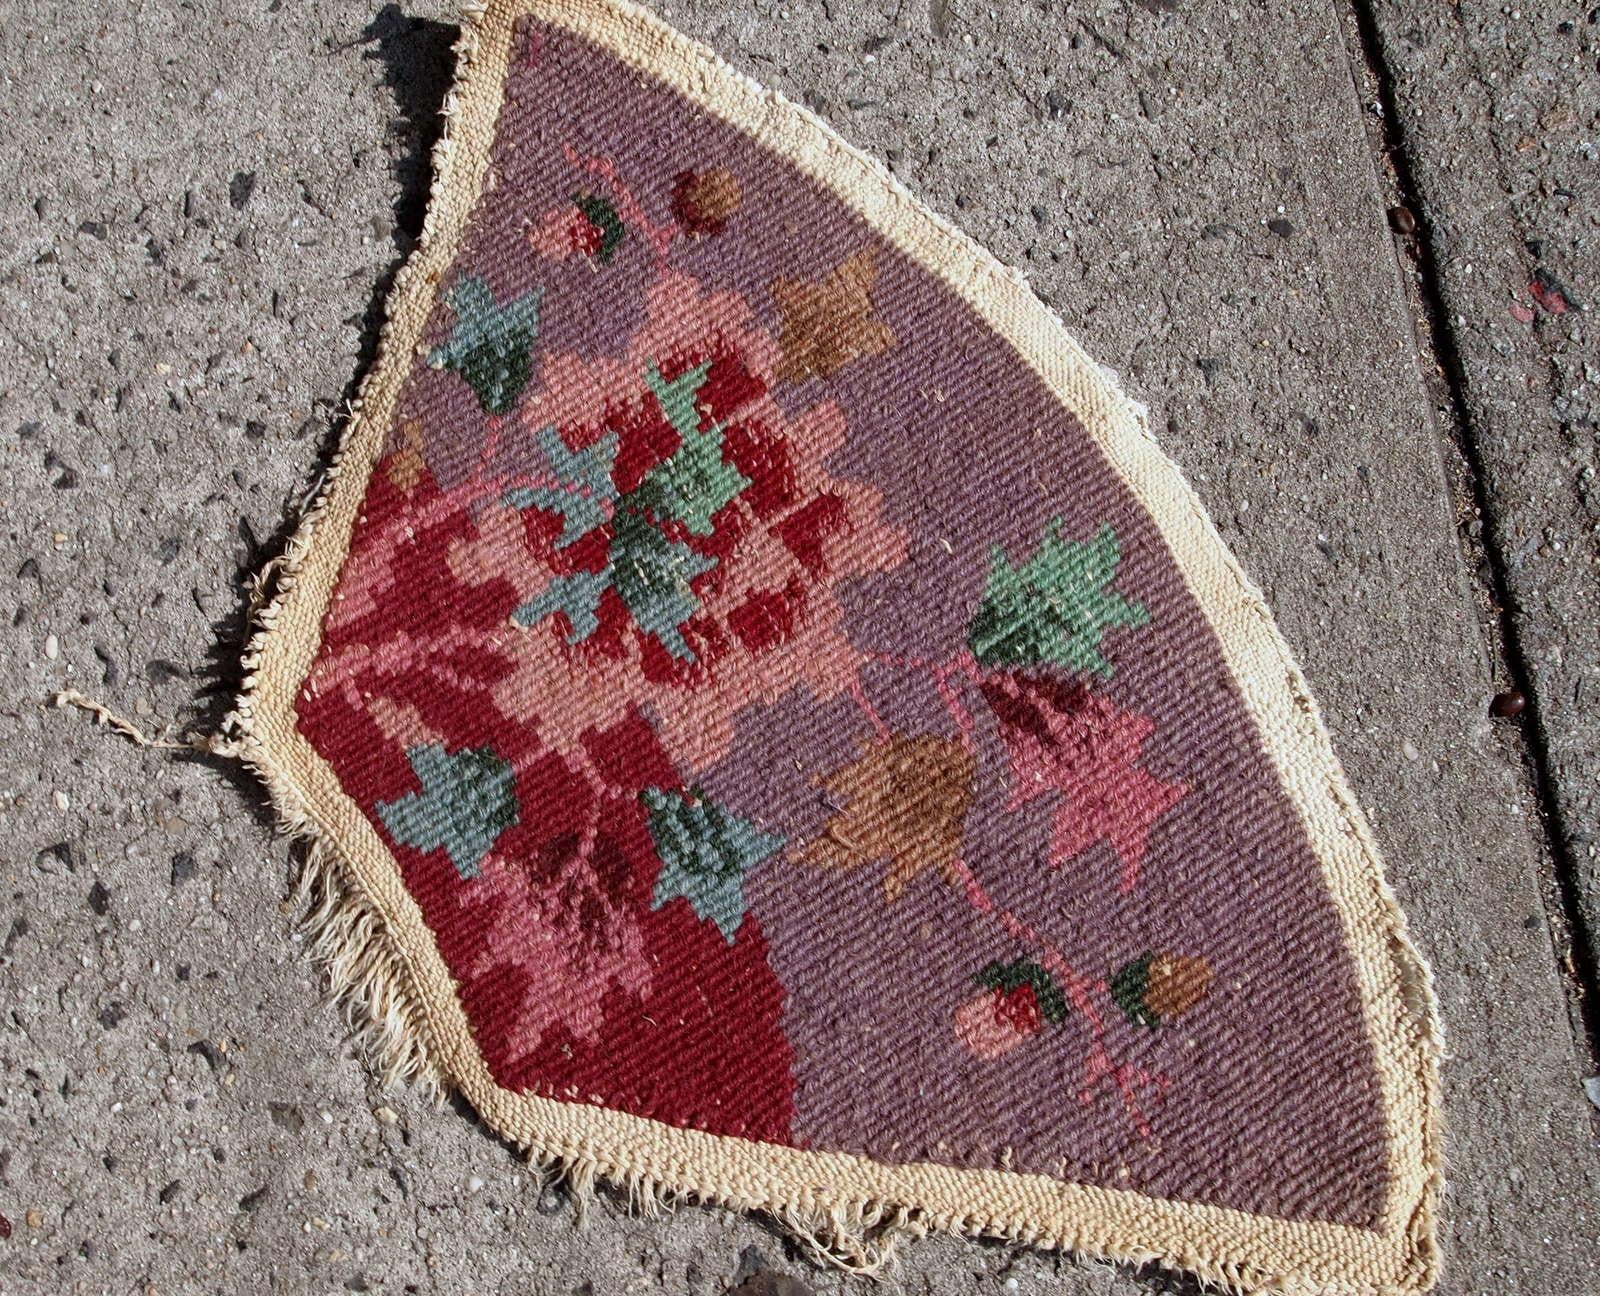 Handmade antique Art Deco Chinese mat in red and beige wool. The rug is from the beginning of 20th century, in original good condition.

?-condition: original good,

-circa: 1920s,

-size: 1' x 1.7' (30cm x 53cm),

-material: